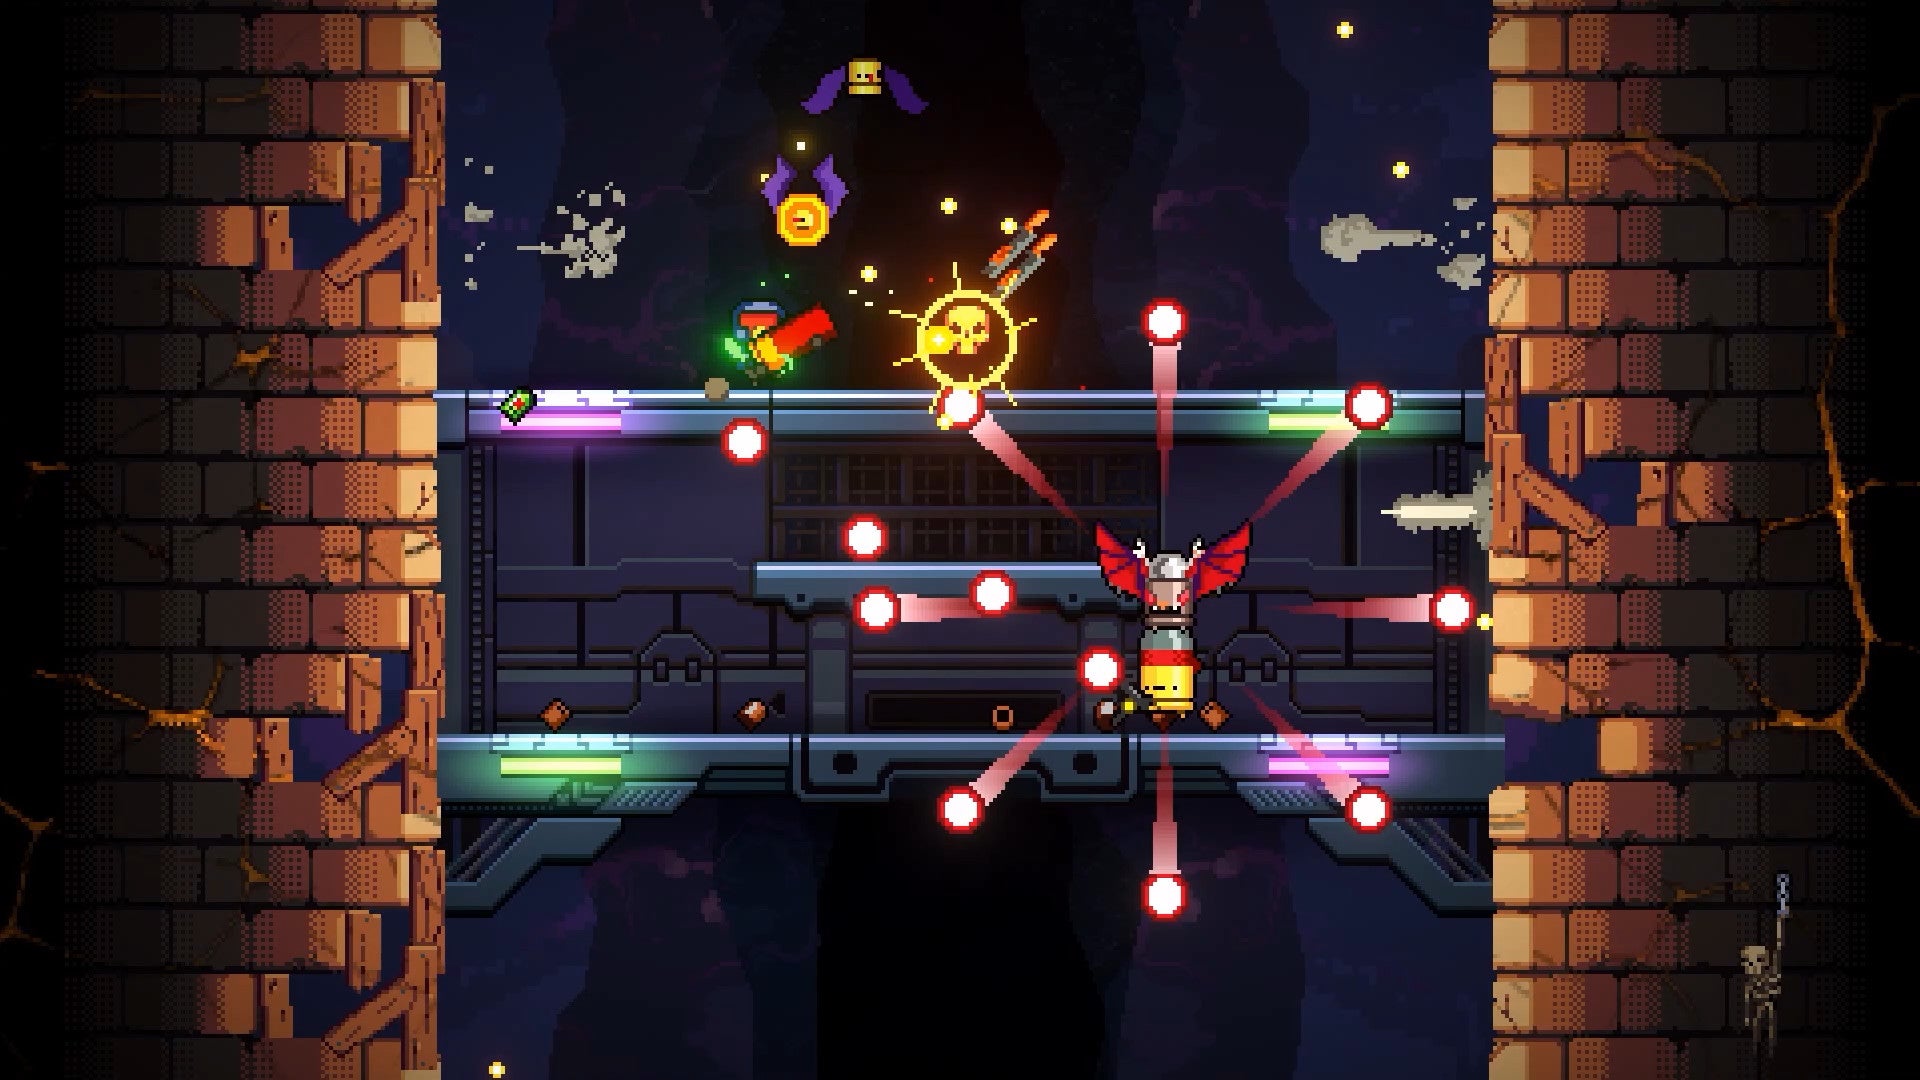 A player ascends a lift while fighting enemies in Exit the Gungeon